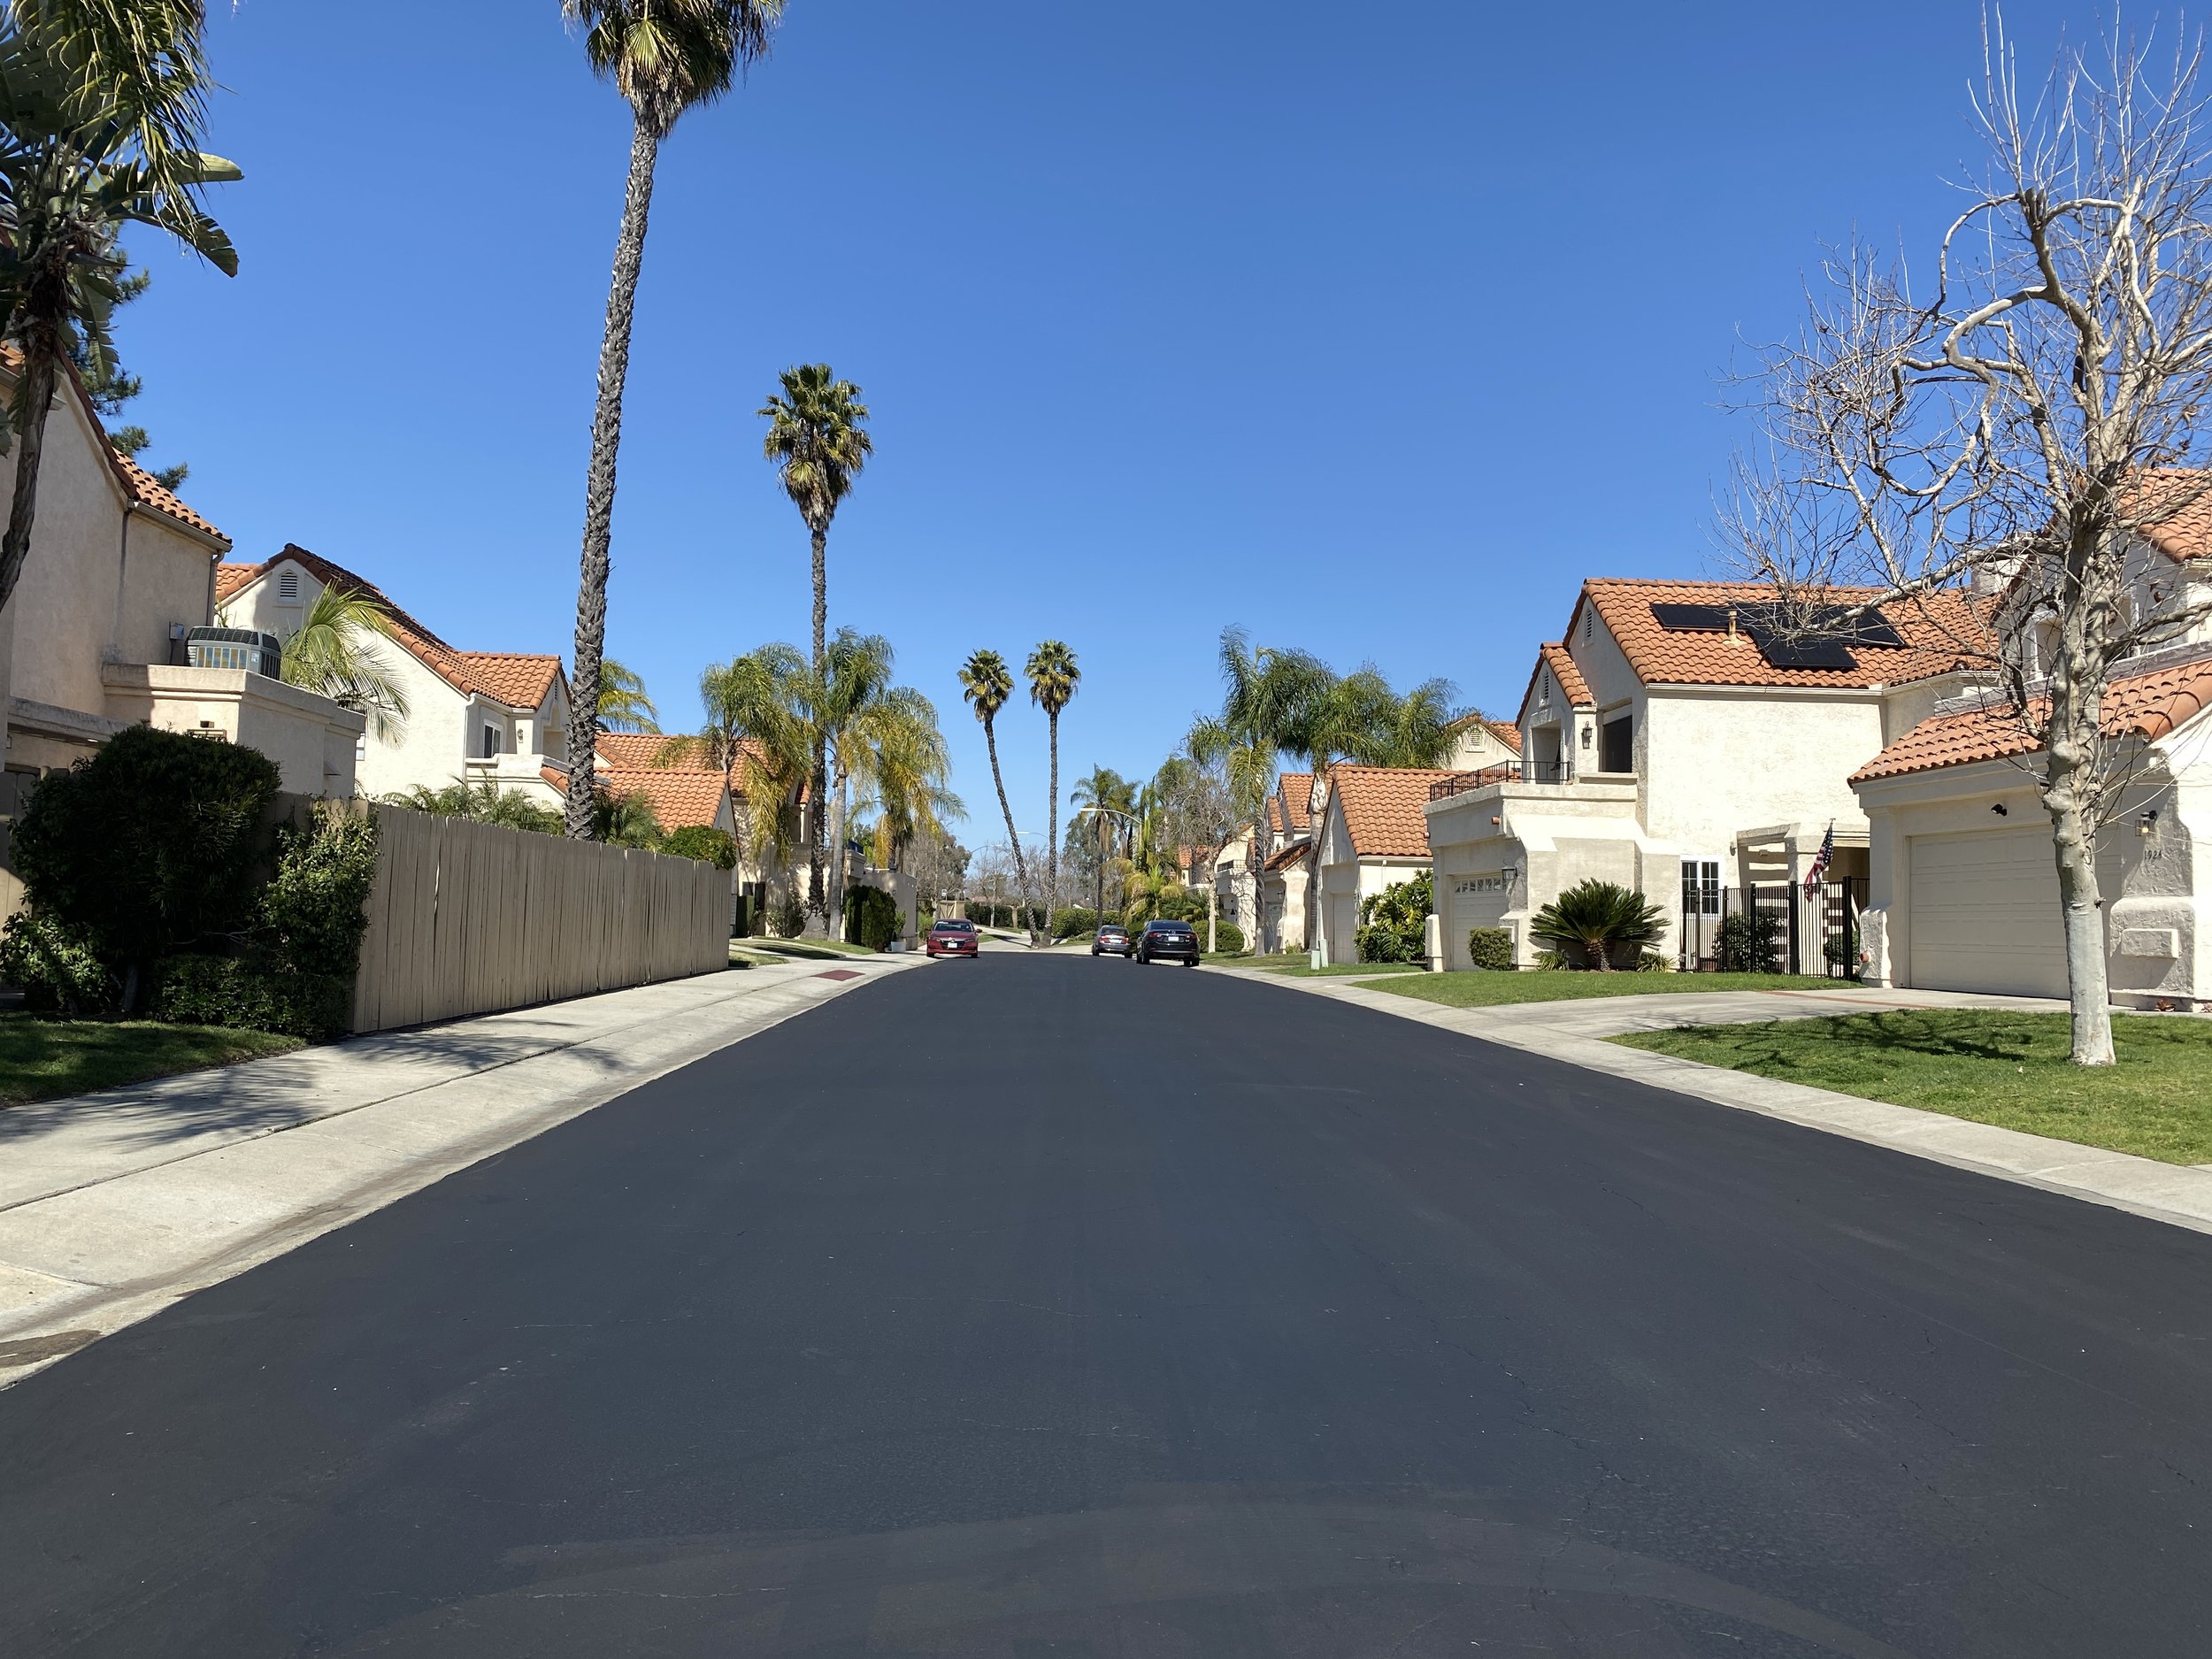  A freshly sealed residential street with palm trees 